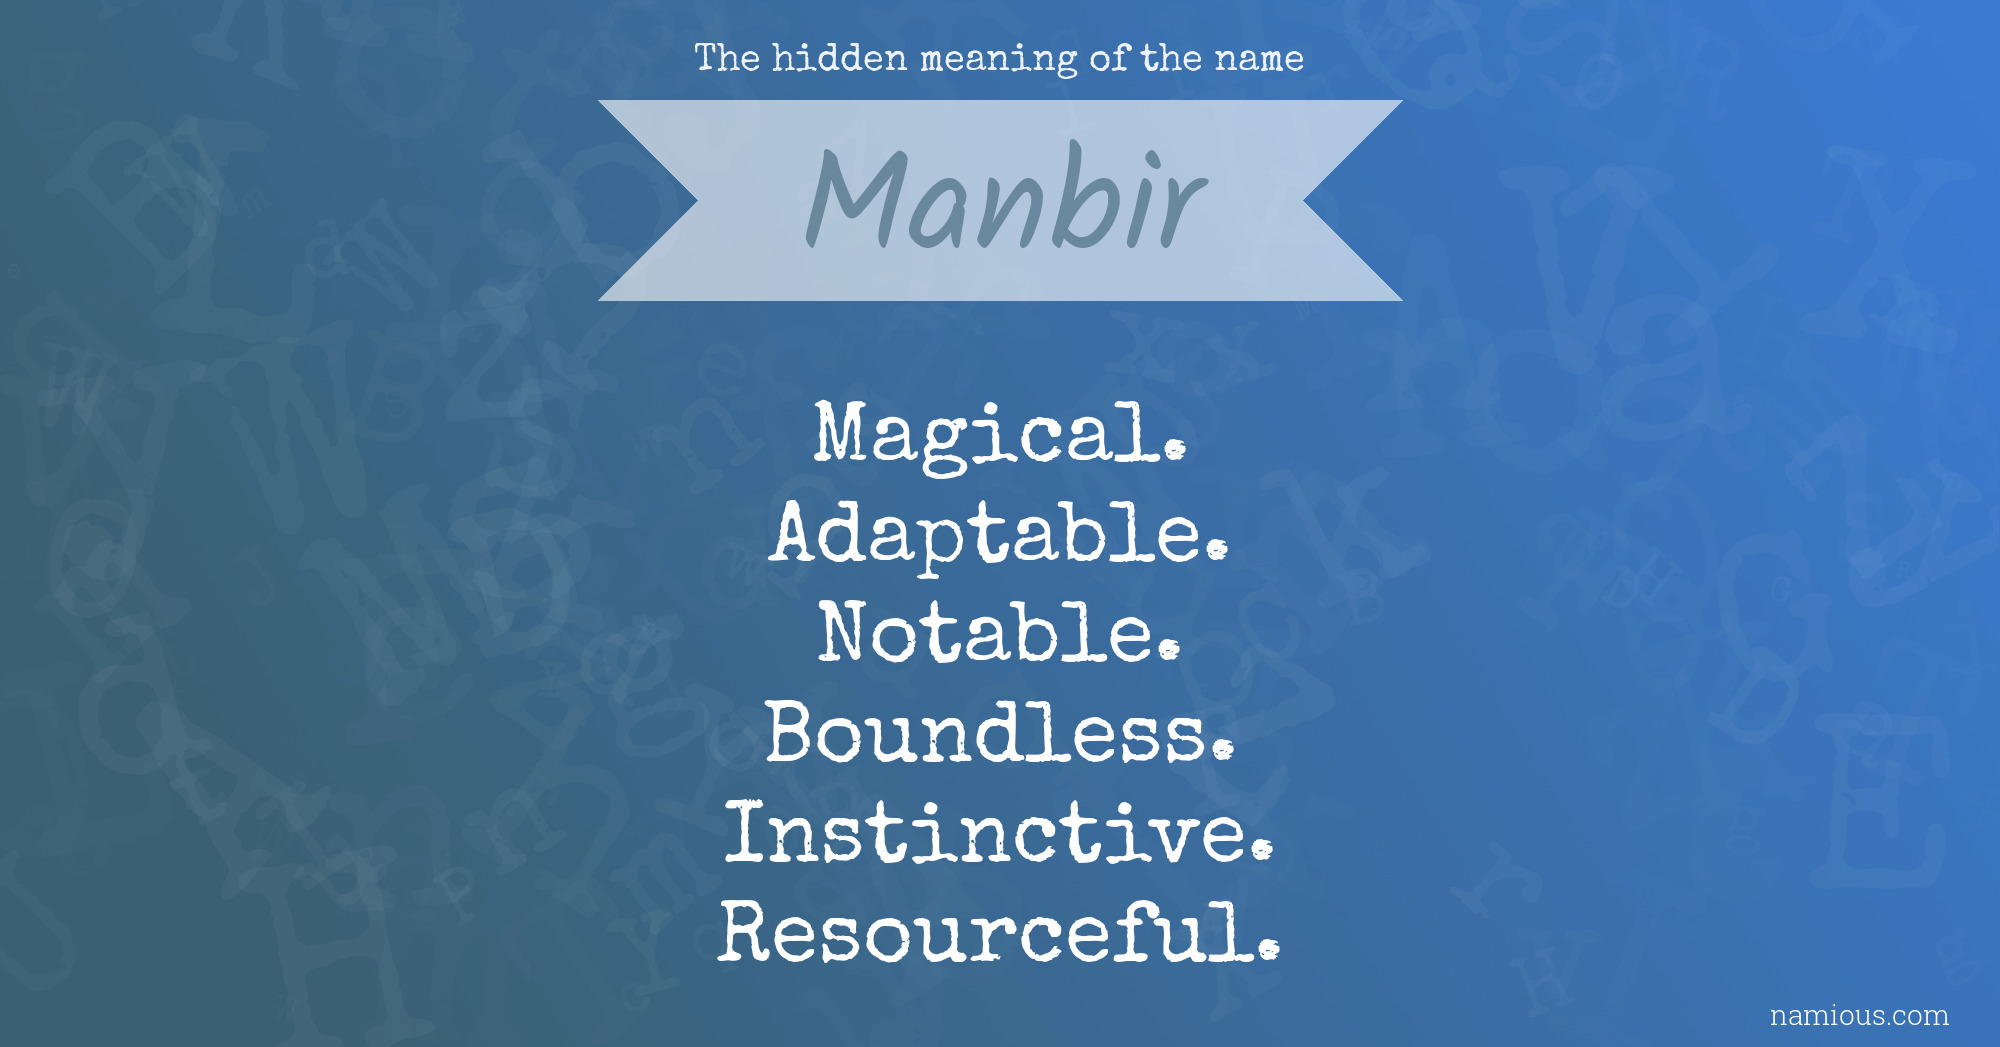 The hidden meaning of the name Manbir